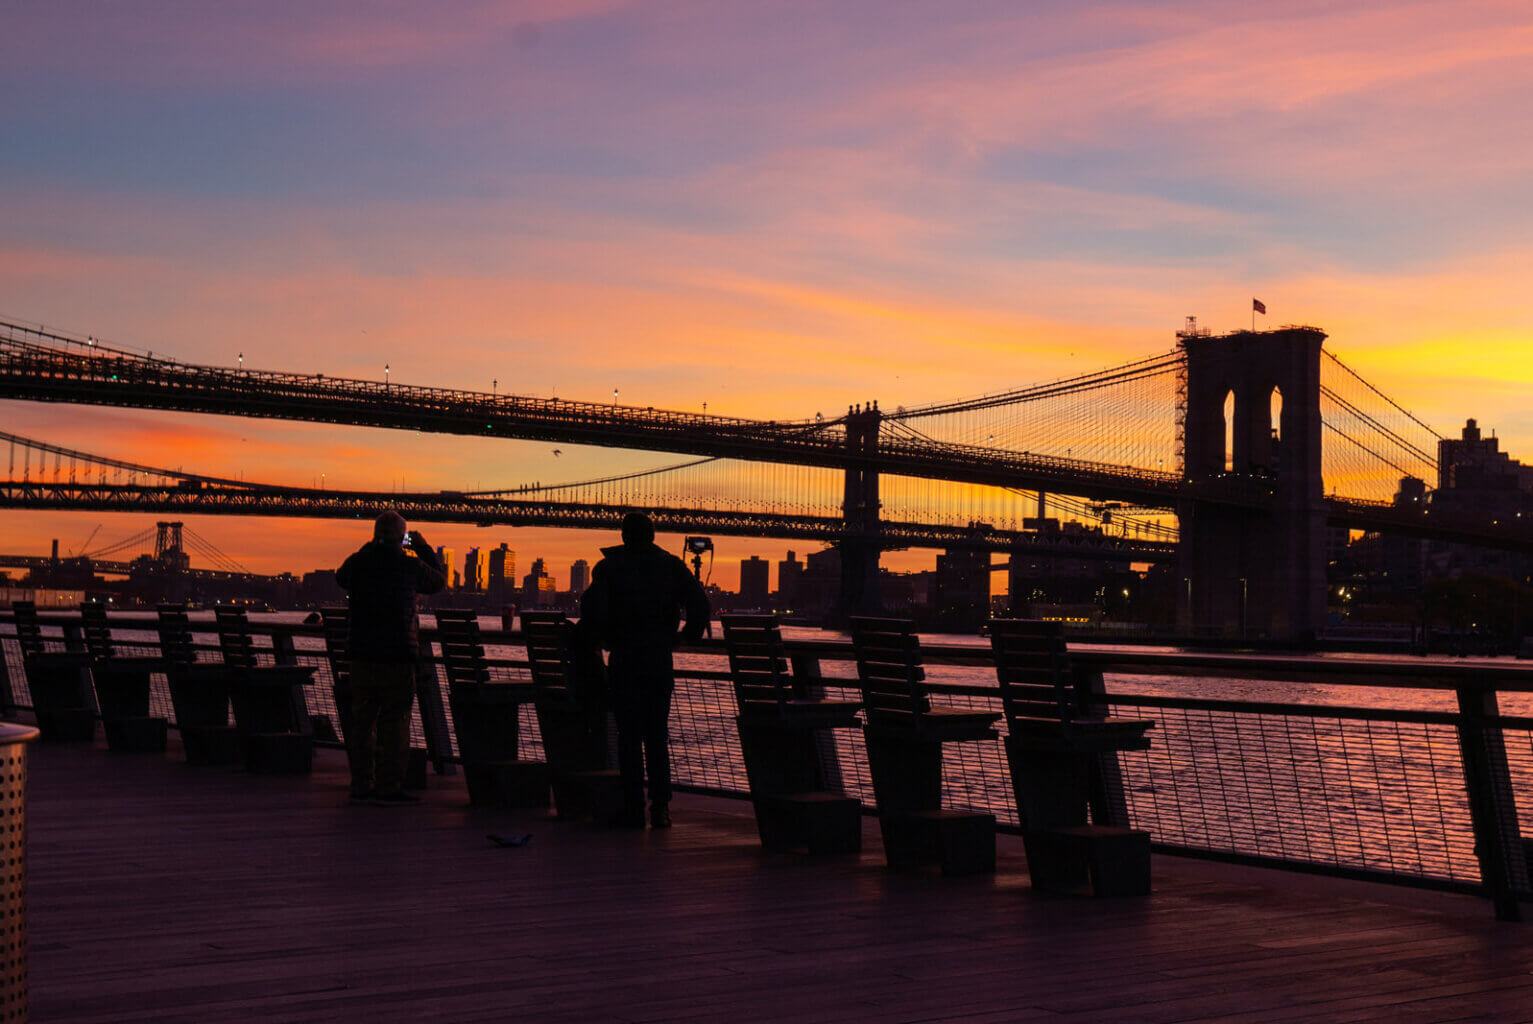 sunset view of the Brooklyn Bridge from Pier 17 in South Street Seaport in NYC